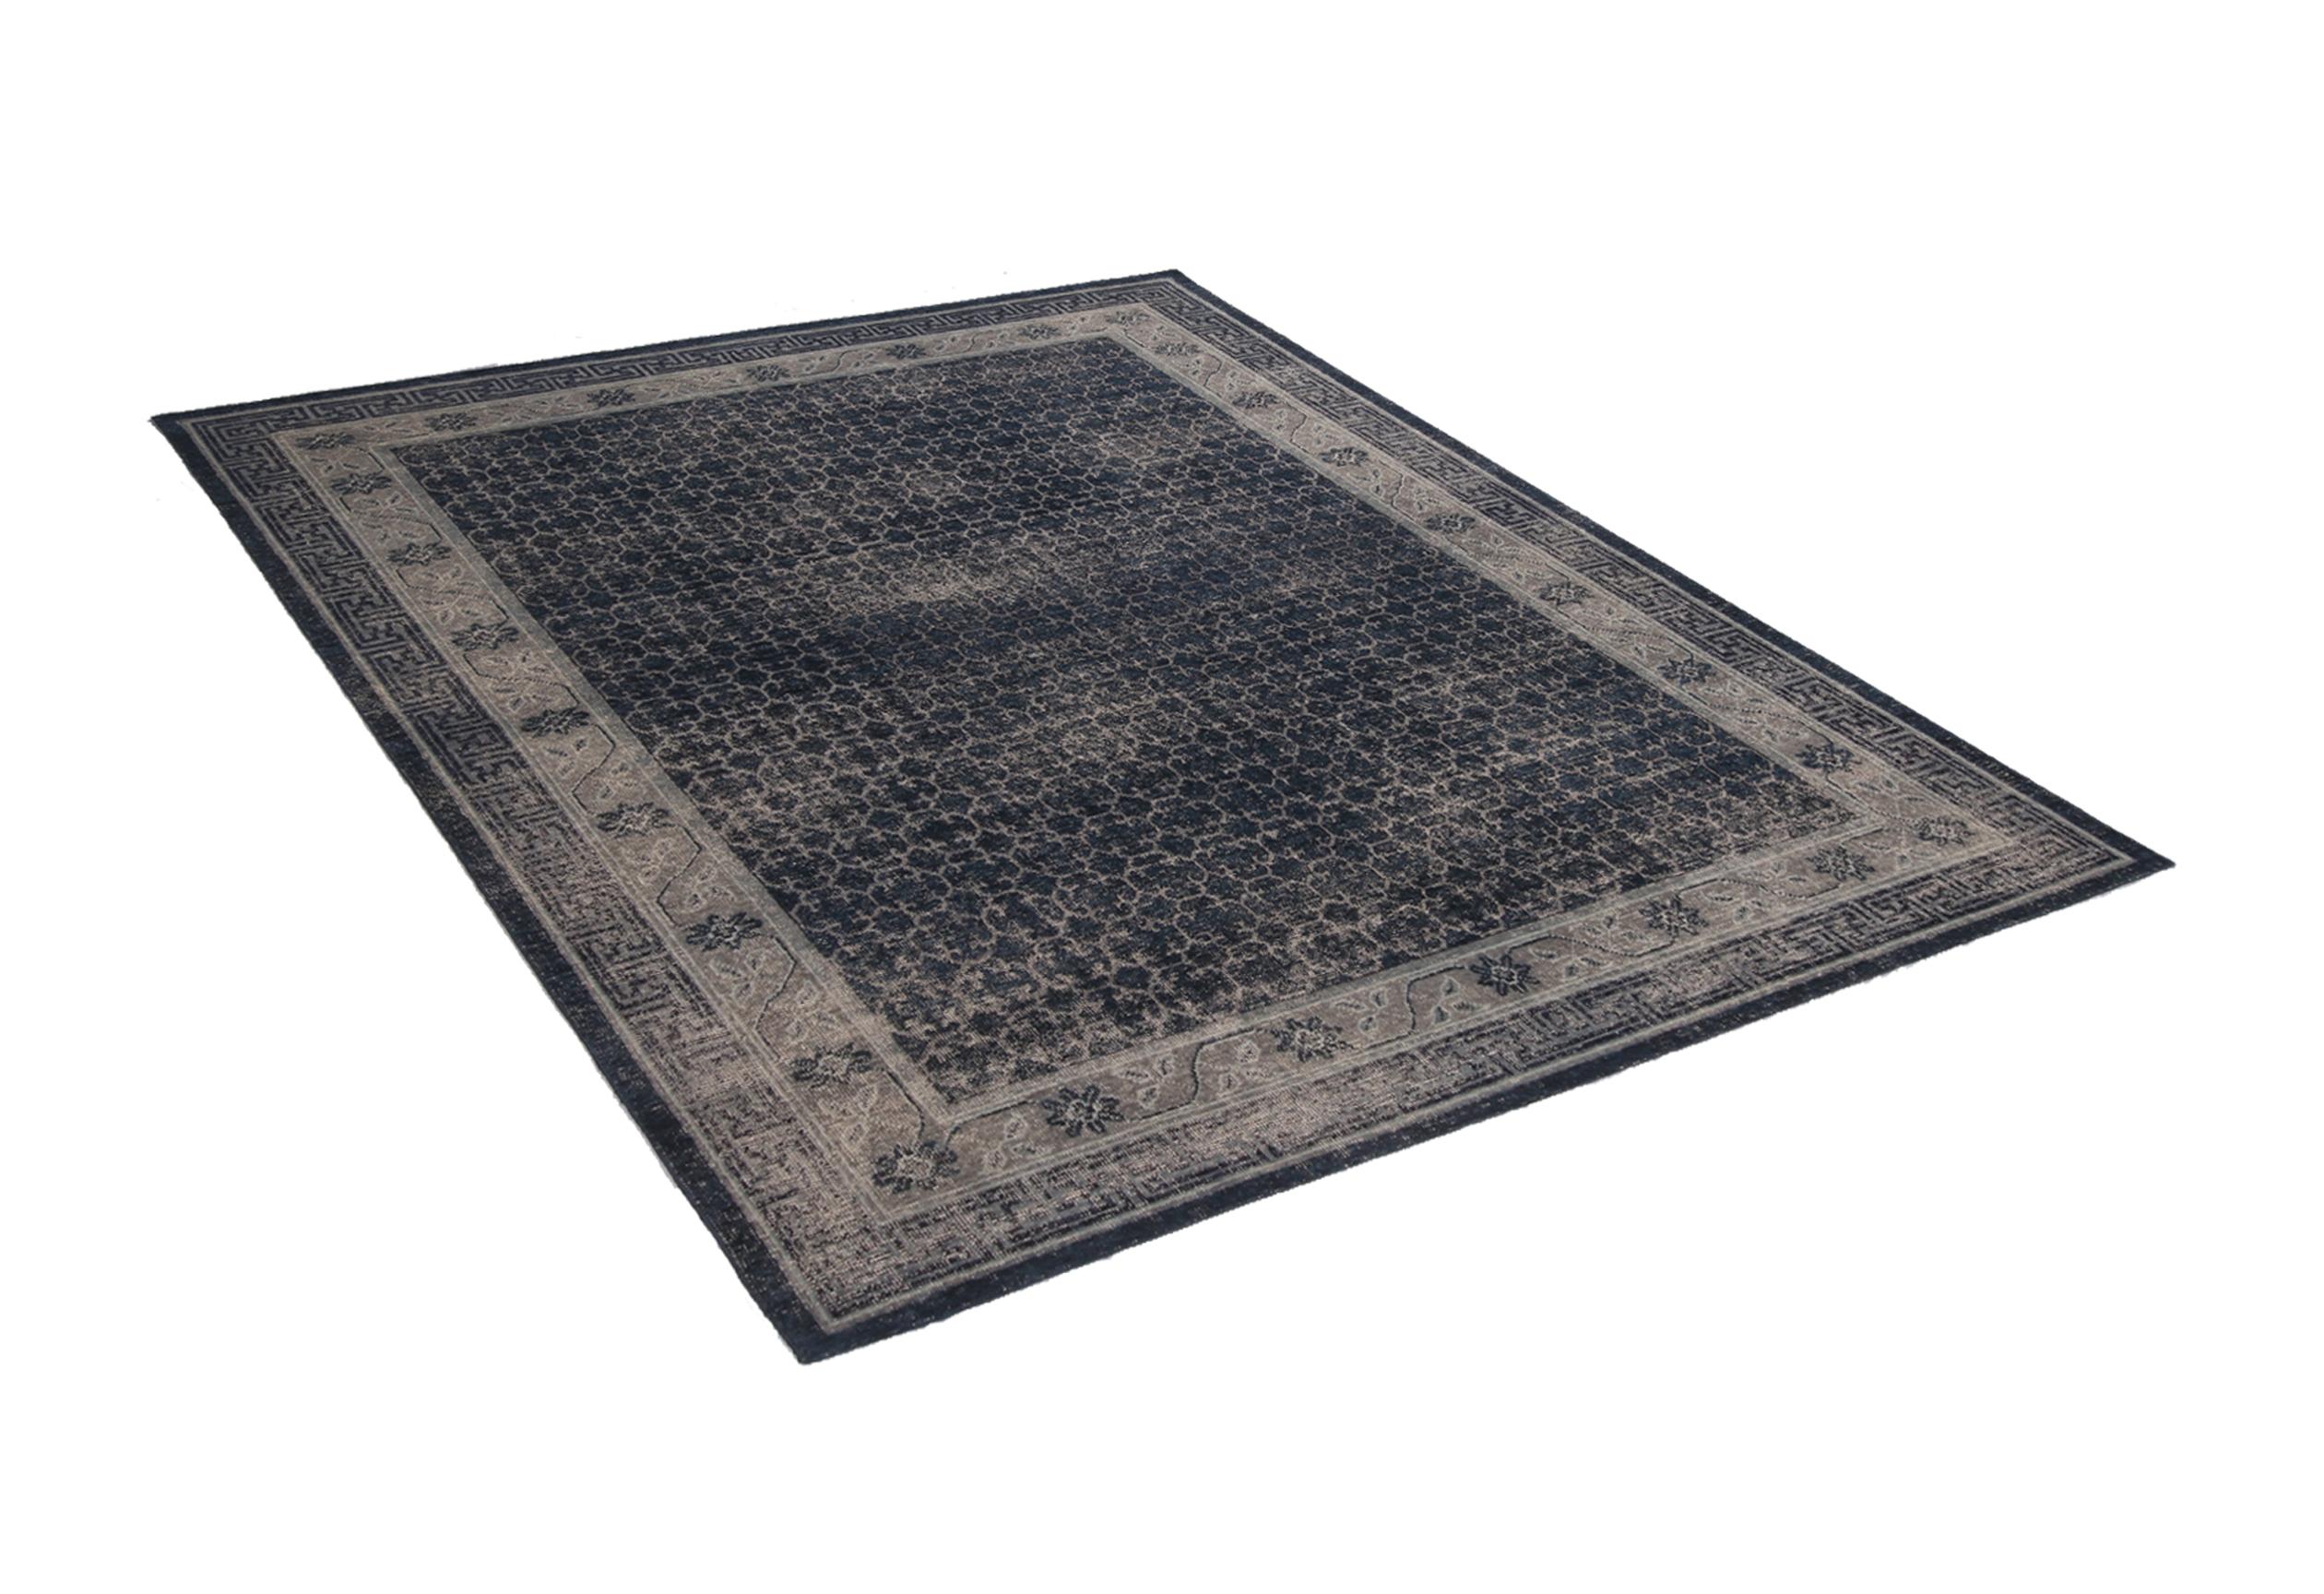 This contemporary hand knotted wool Khotan rug hails from Rug & Kilim’s Homage Collection, enjoying a finer take on distressed shabby chic aesthetic with fewer knots per square inch. The very Industrial navy and smoke blue colorways complement a